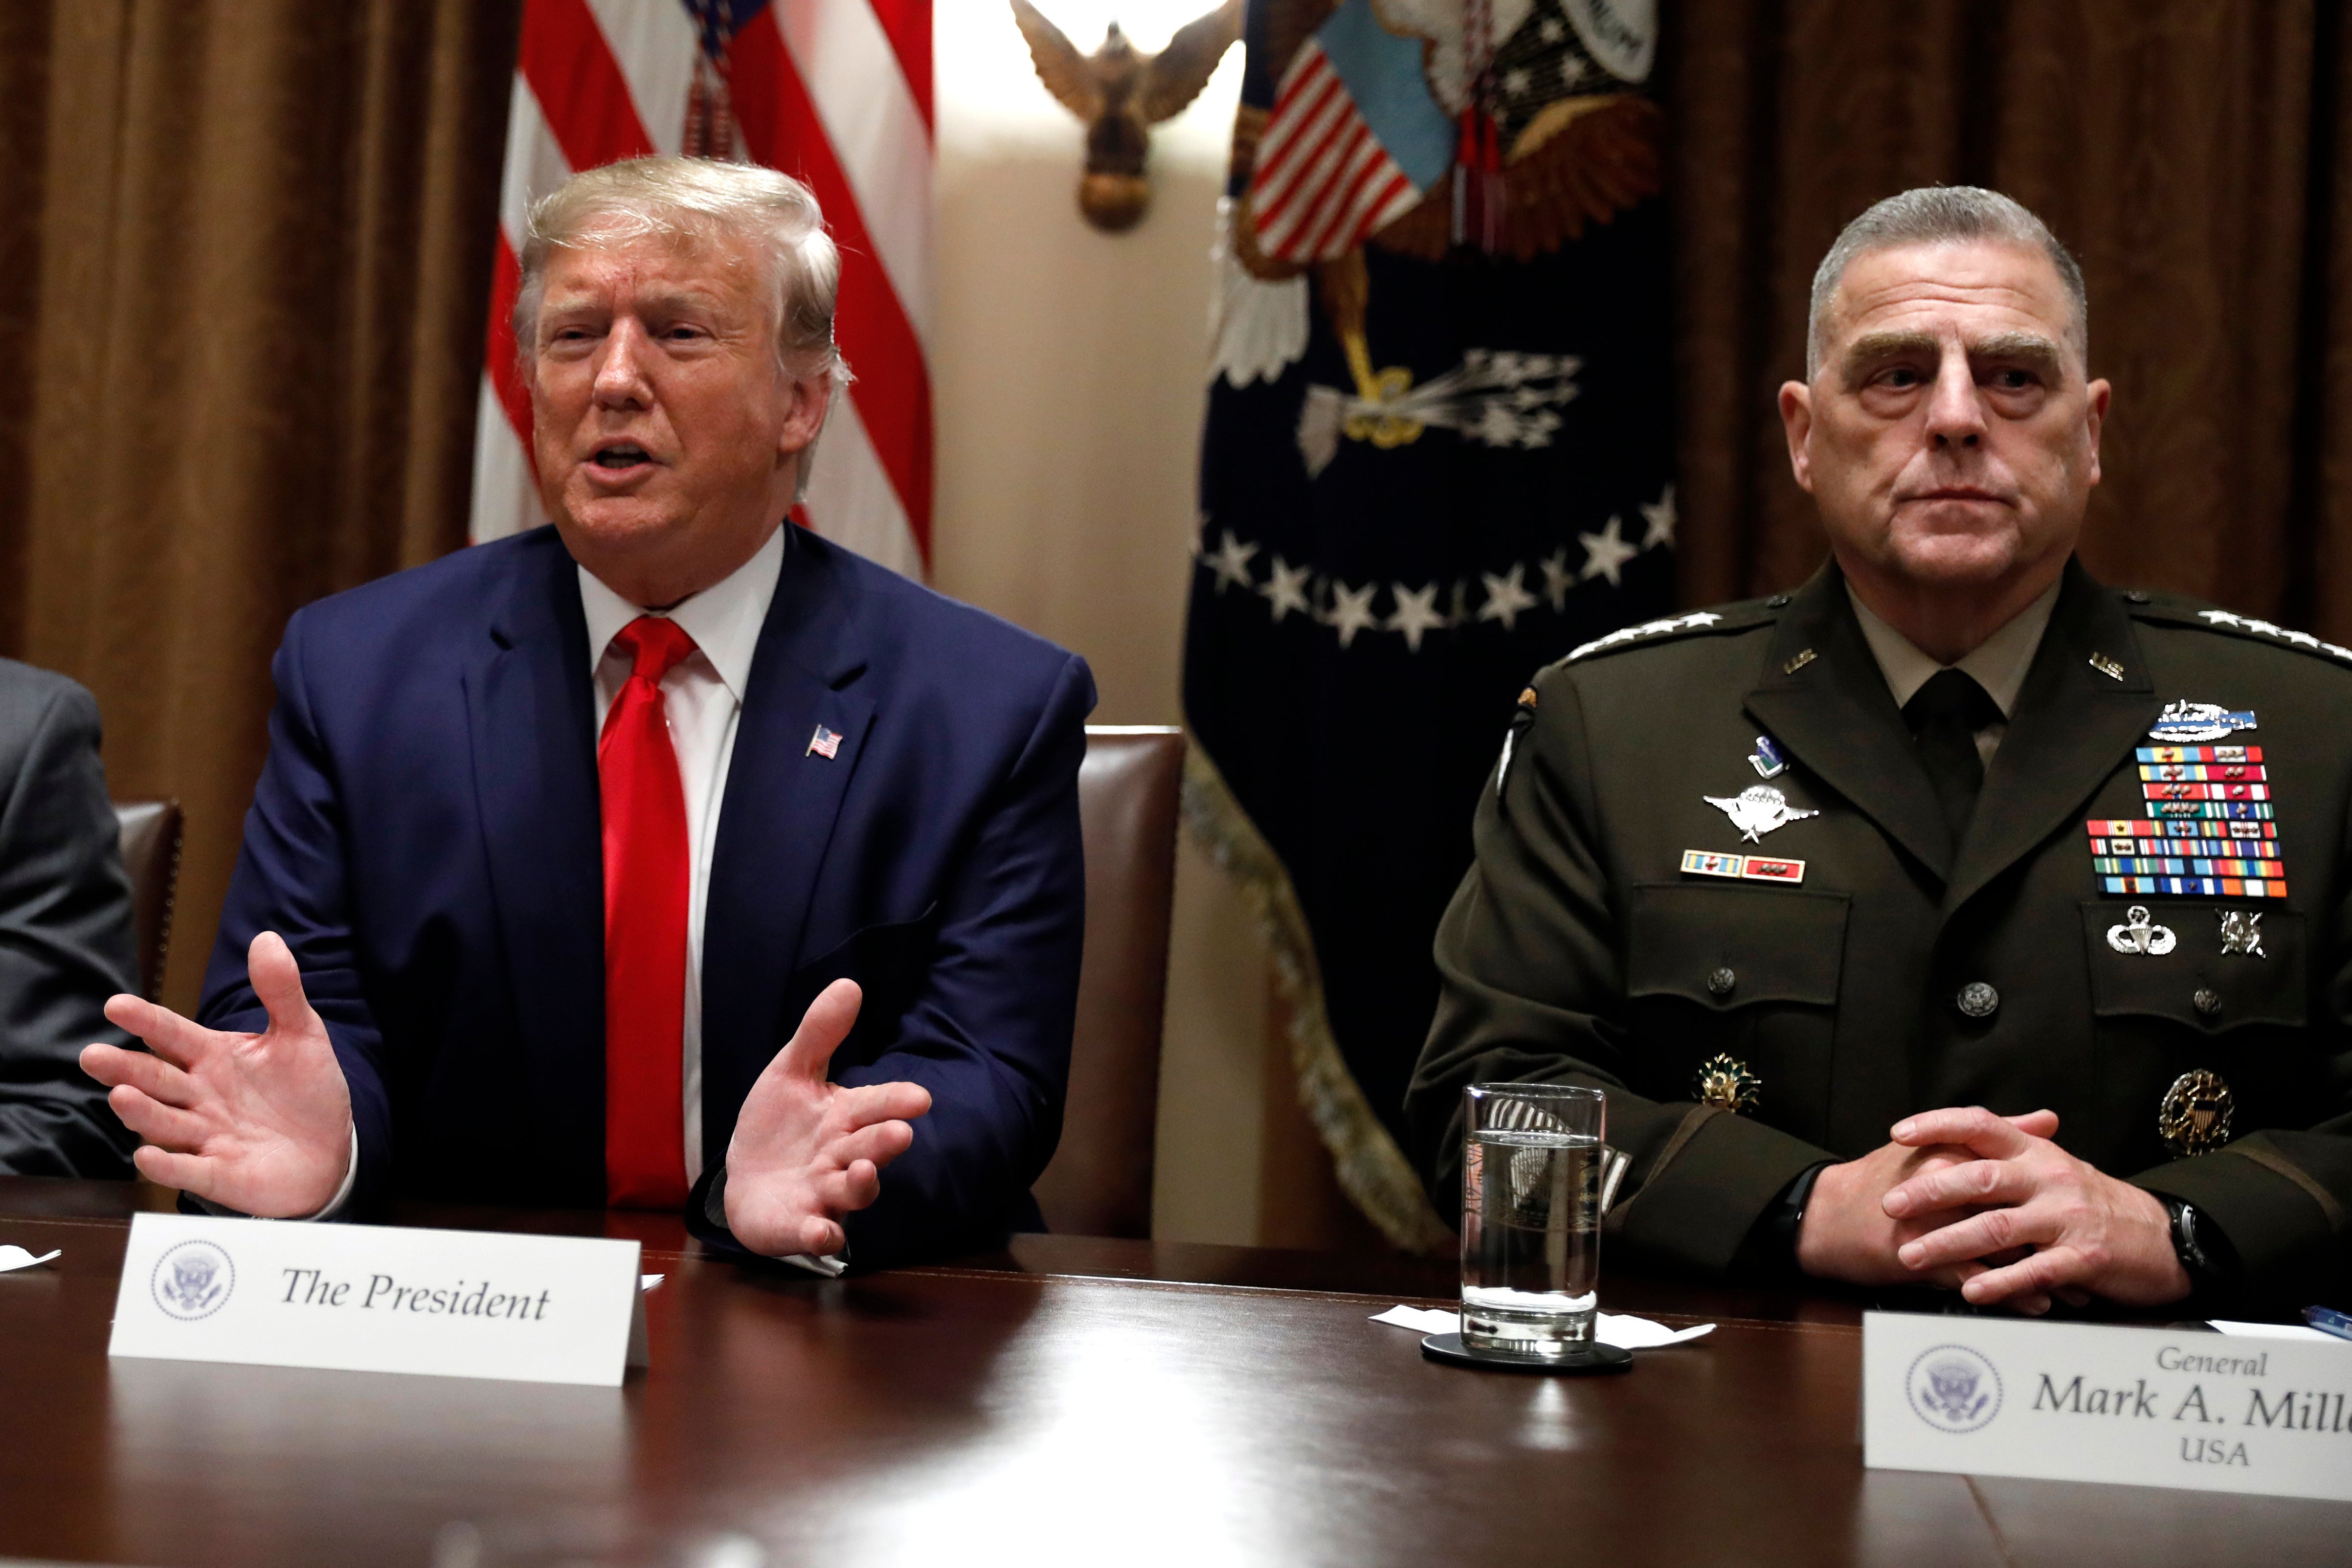 Former president Trump suggested that Gen. Milley should be executed for treason